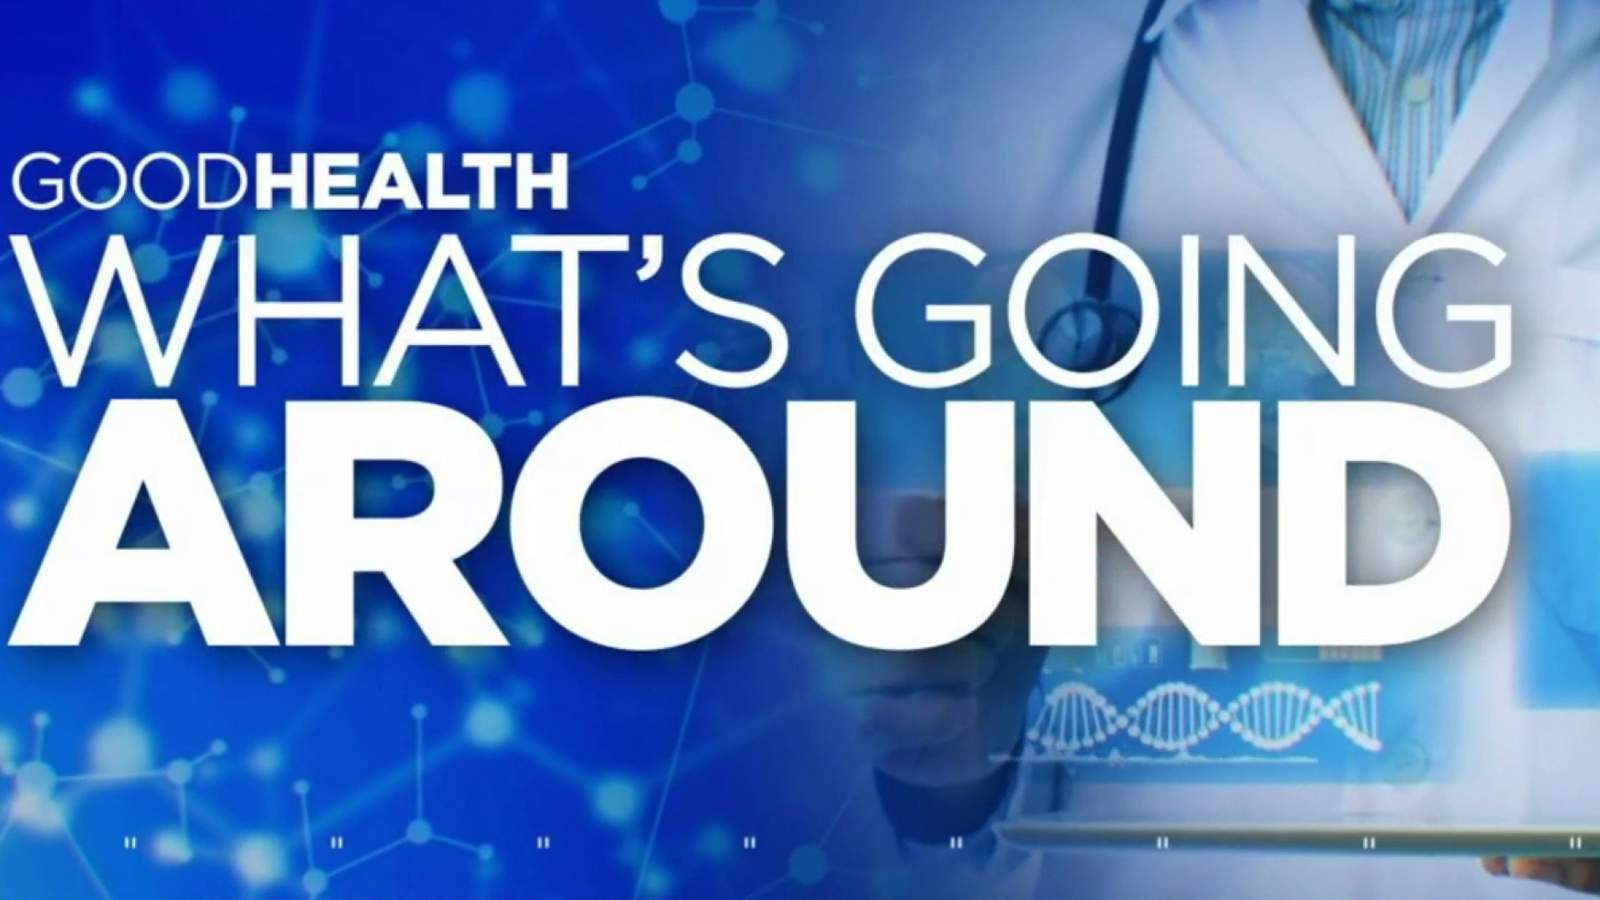 Good Health: What's going around week of 11/1/19